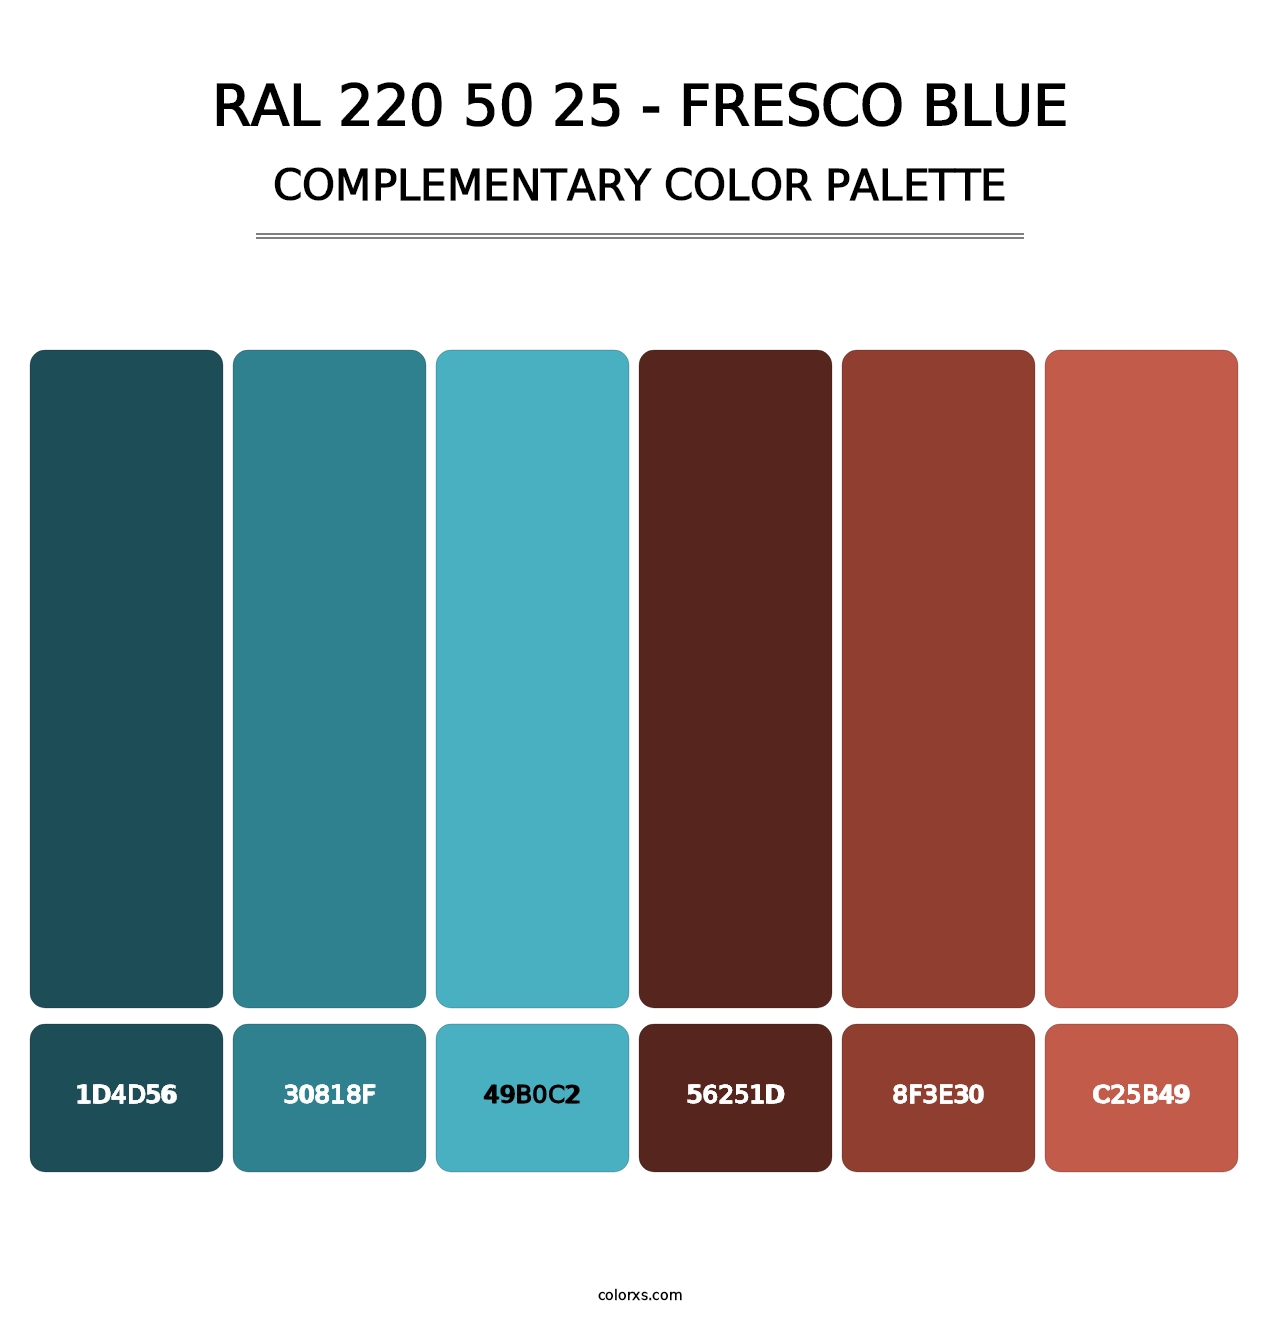 RAL 220 50 25 - Fresco Blue - Complementary Color Palette